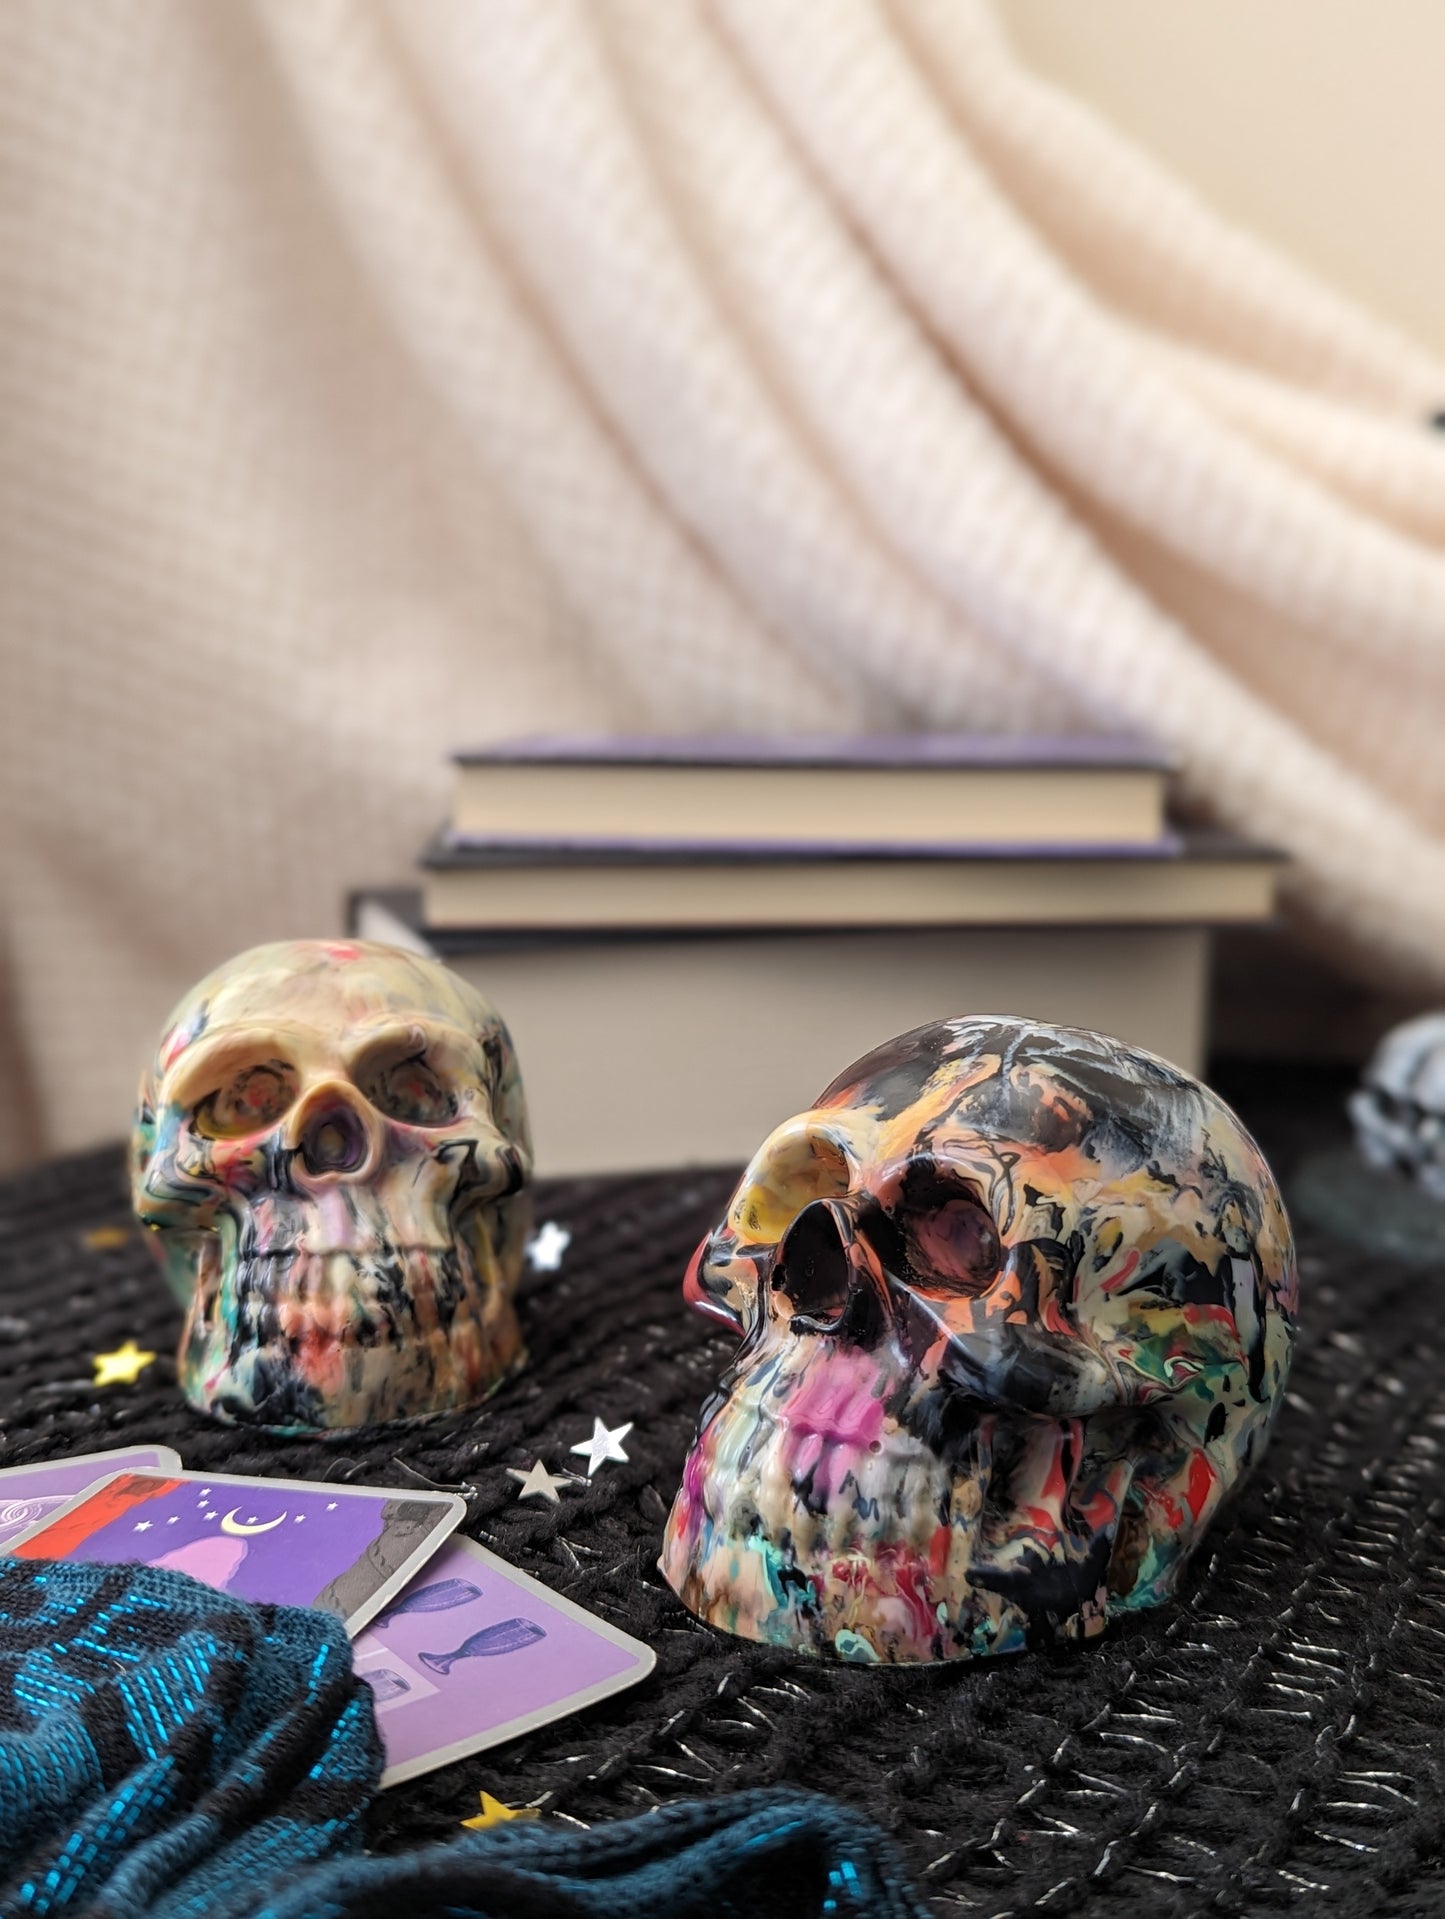 Marbled skull ornaments from 3D printer waste